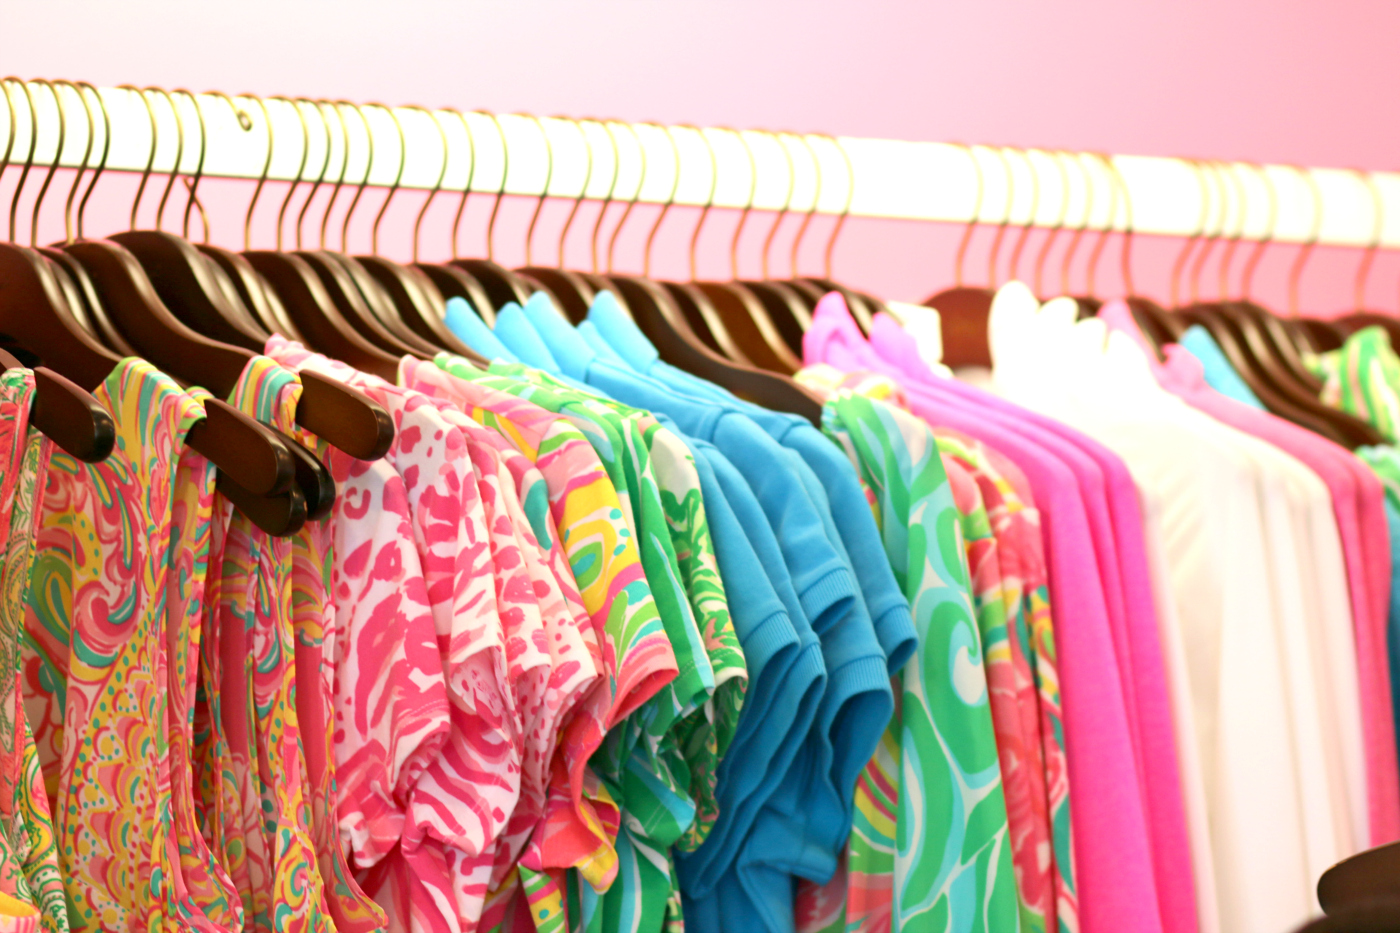 Lilly Pulitzer After Party Sale is live from August 22-23